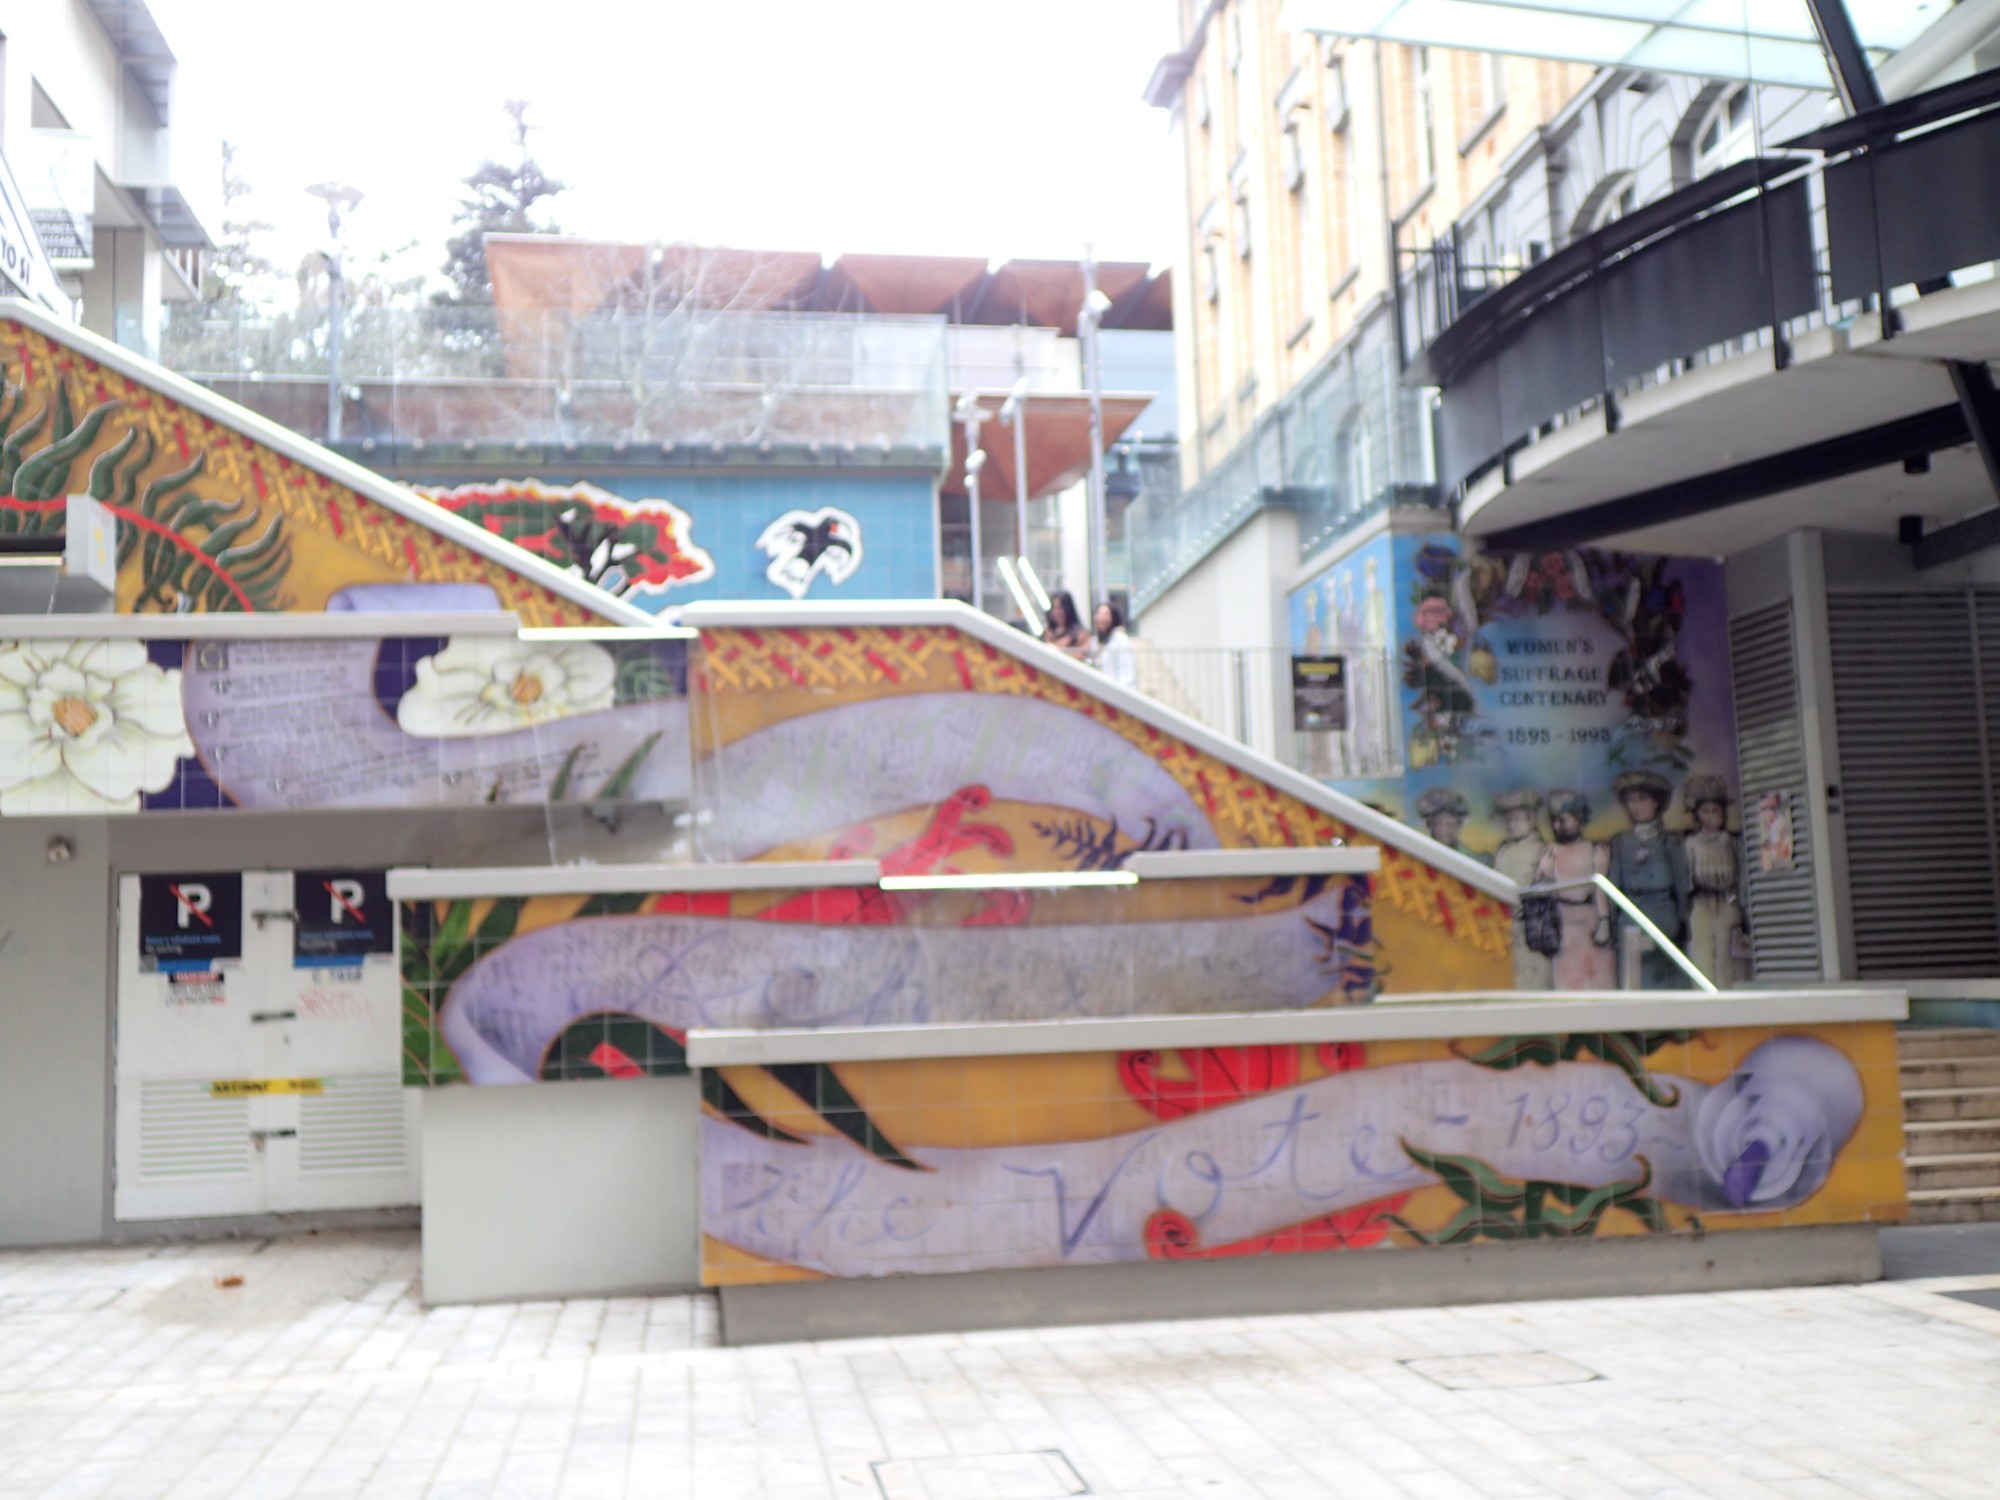 Womens Suffrage Mural & Staircase, New Zealand